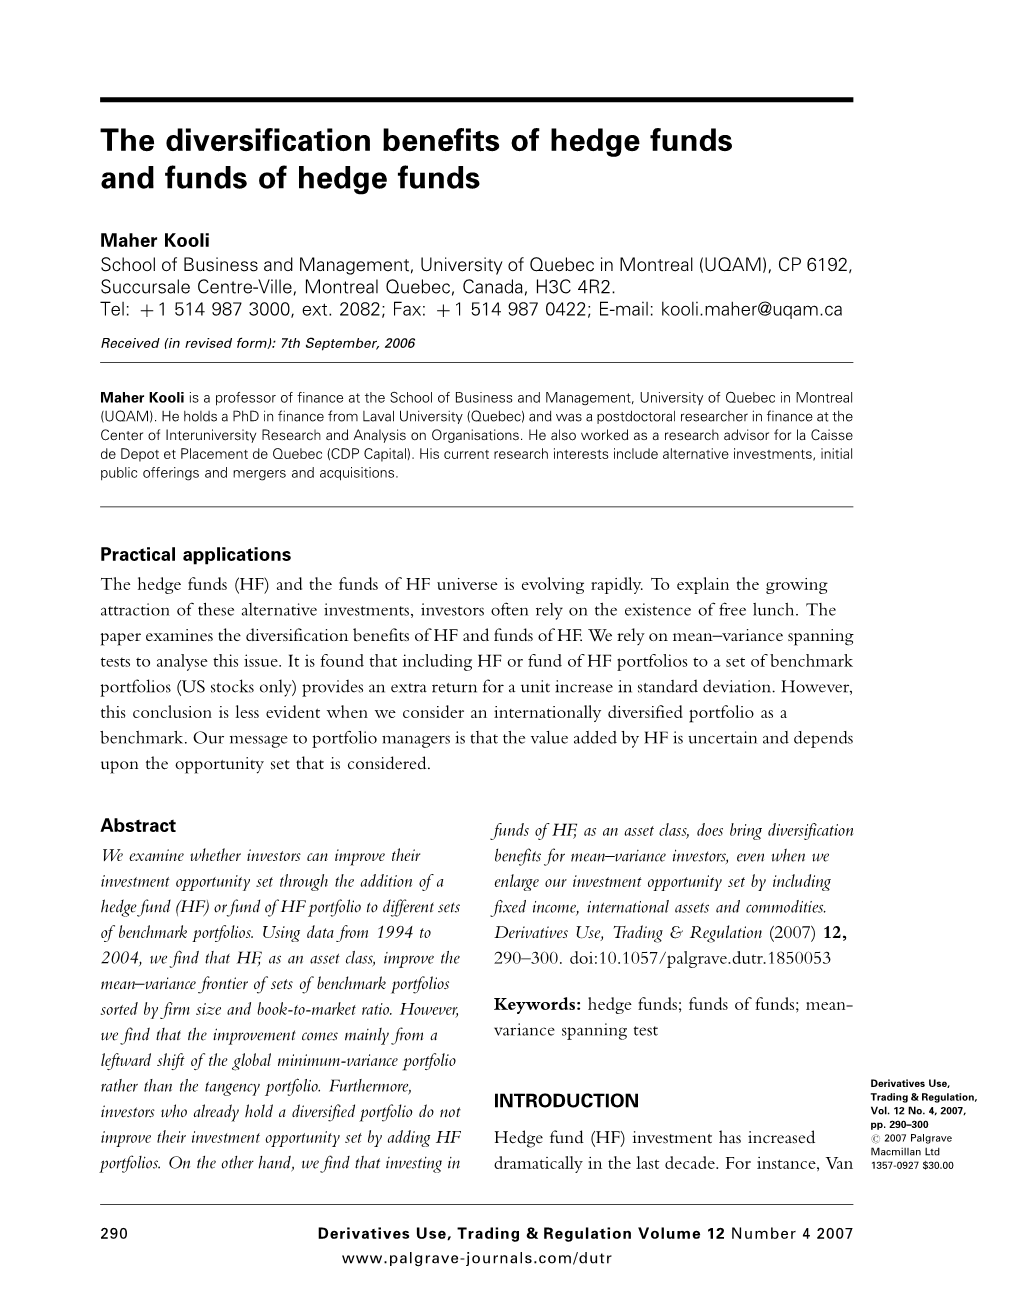 The Diversification Benefits of Hedge Funds and Funds of Hedge Funds